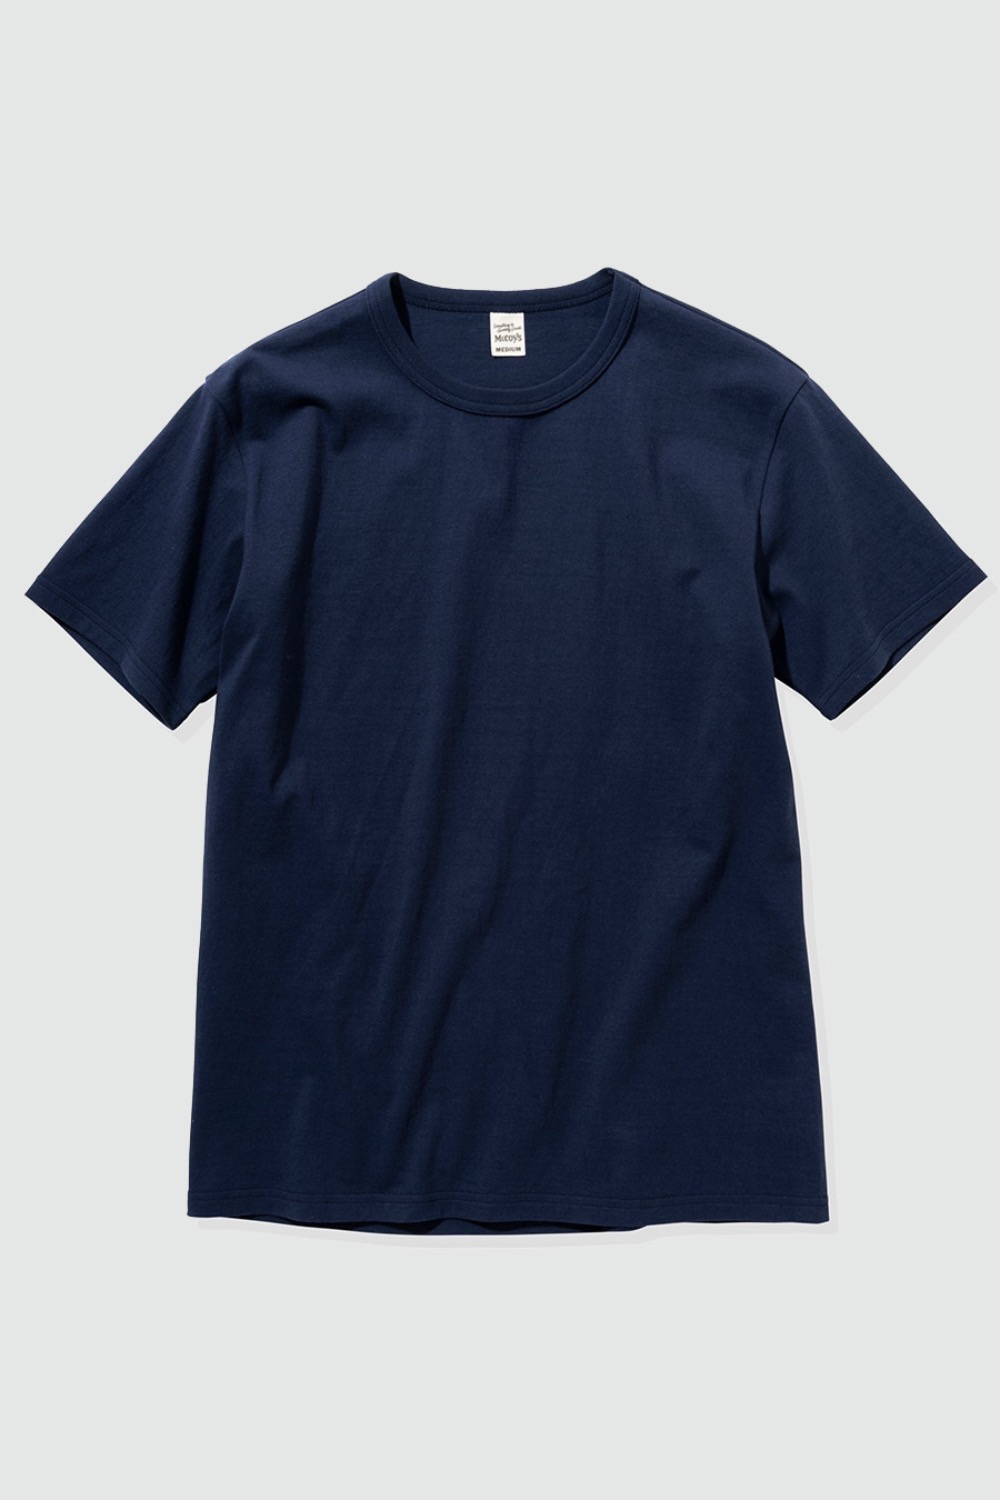 (CARRY OVER) MCCOY&#039;S 2PCS PACK TEE NAVY